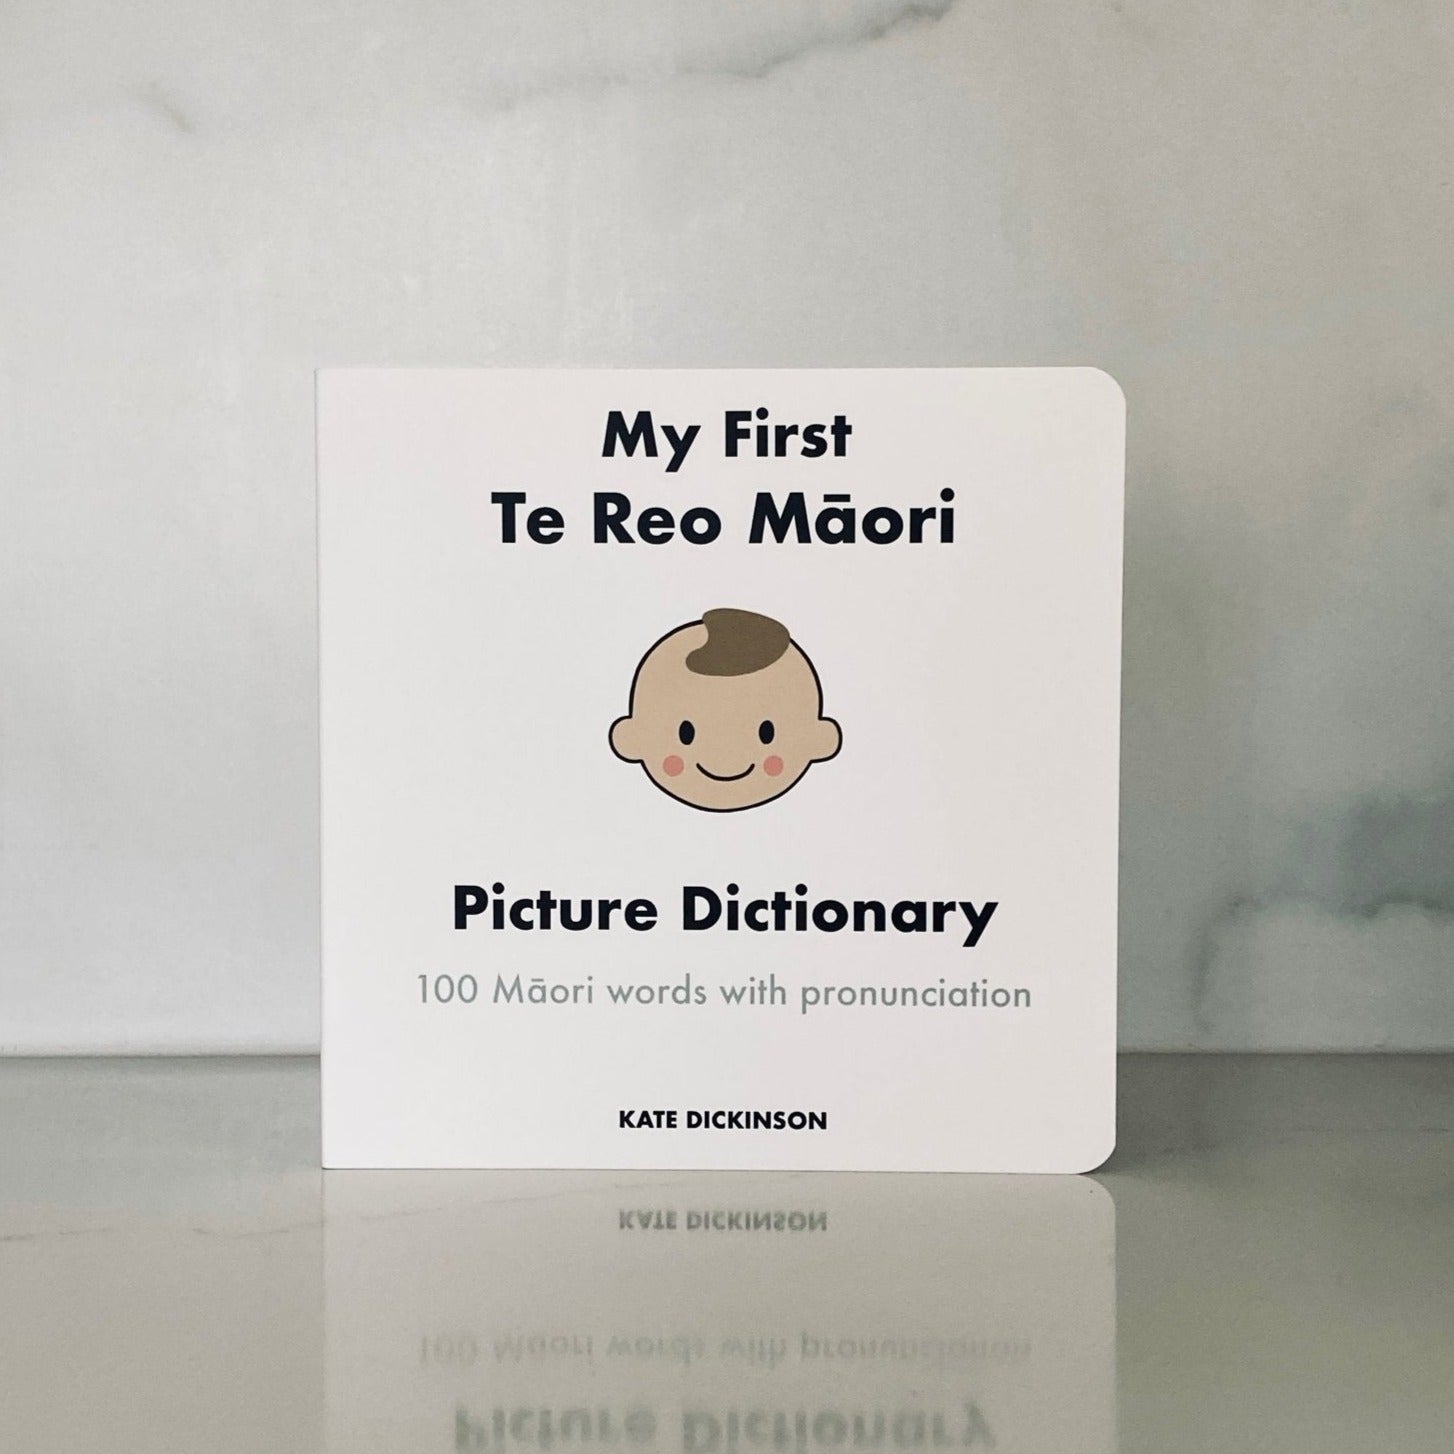 My First Te Reo Maori Picture Dictionary - Board Book. Cover: simple drawing of a baby smiling against a white background.